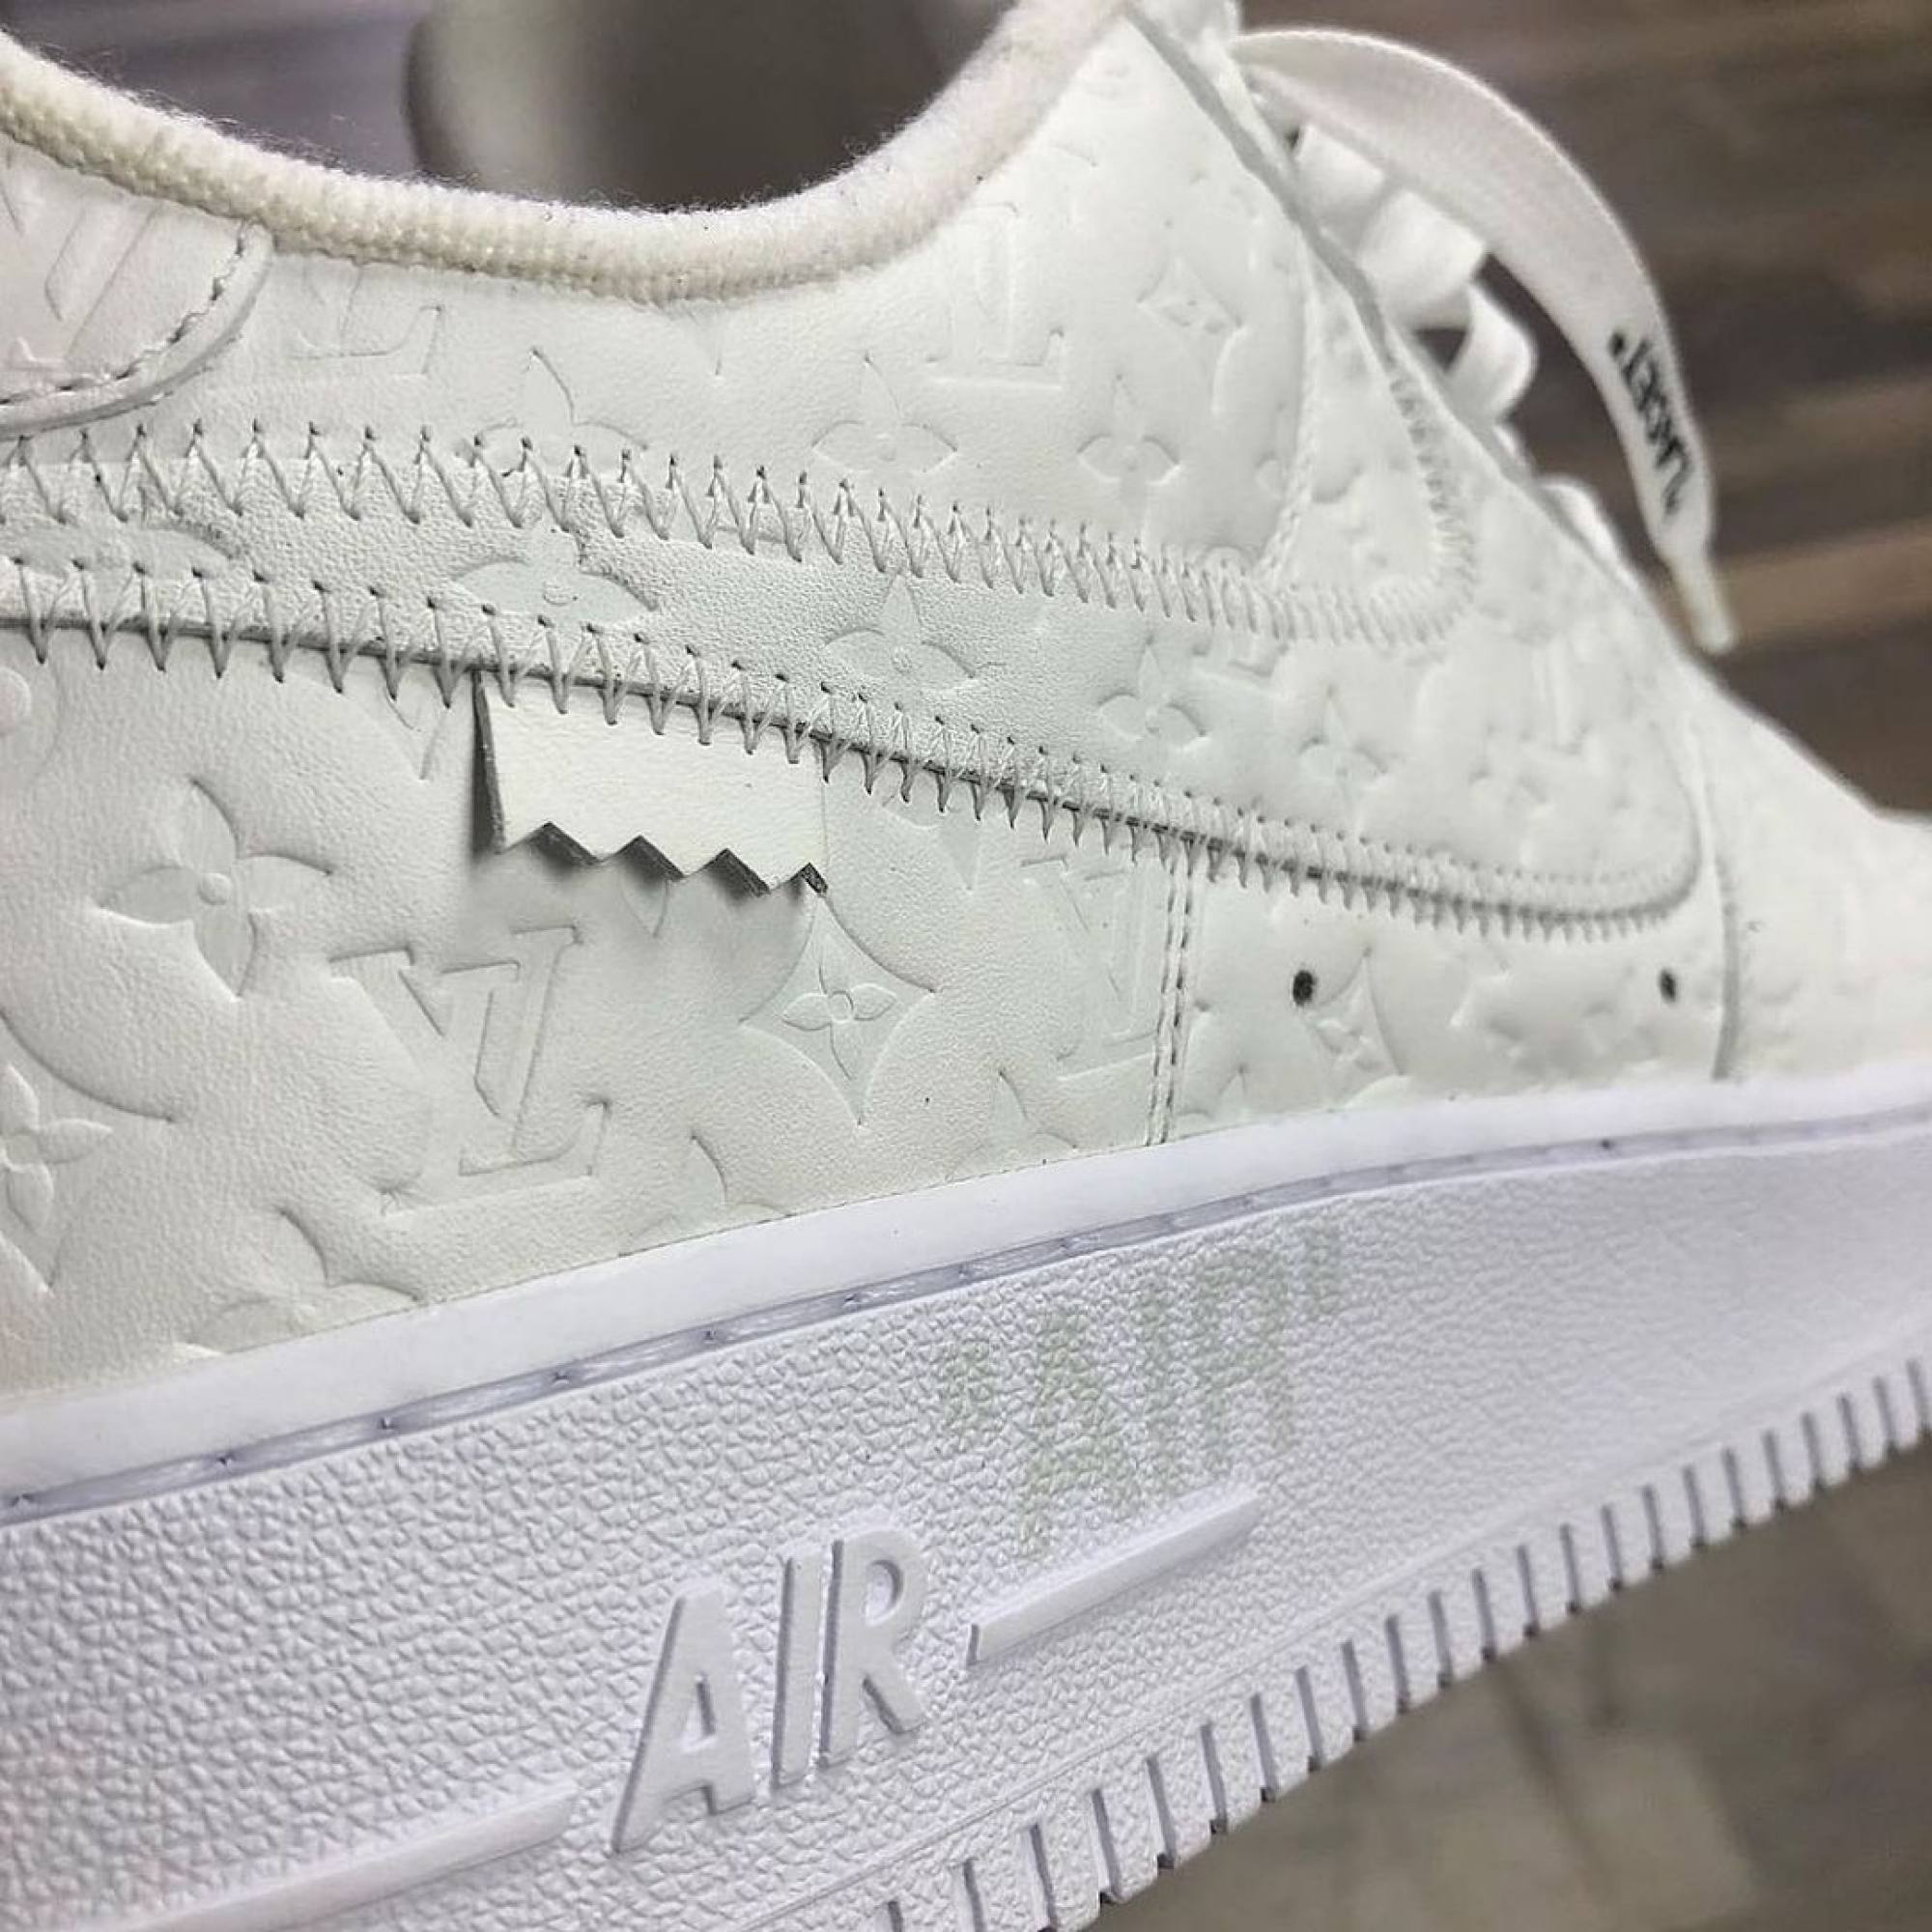 World's most popular sneakers? How Nike Air Force 1s went from the